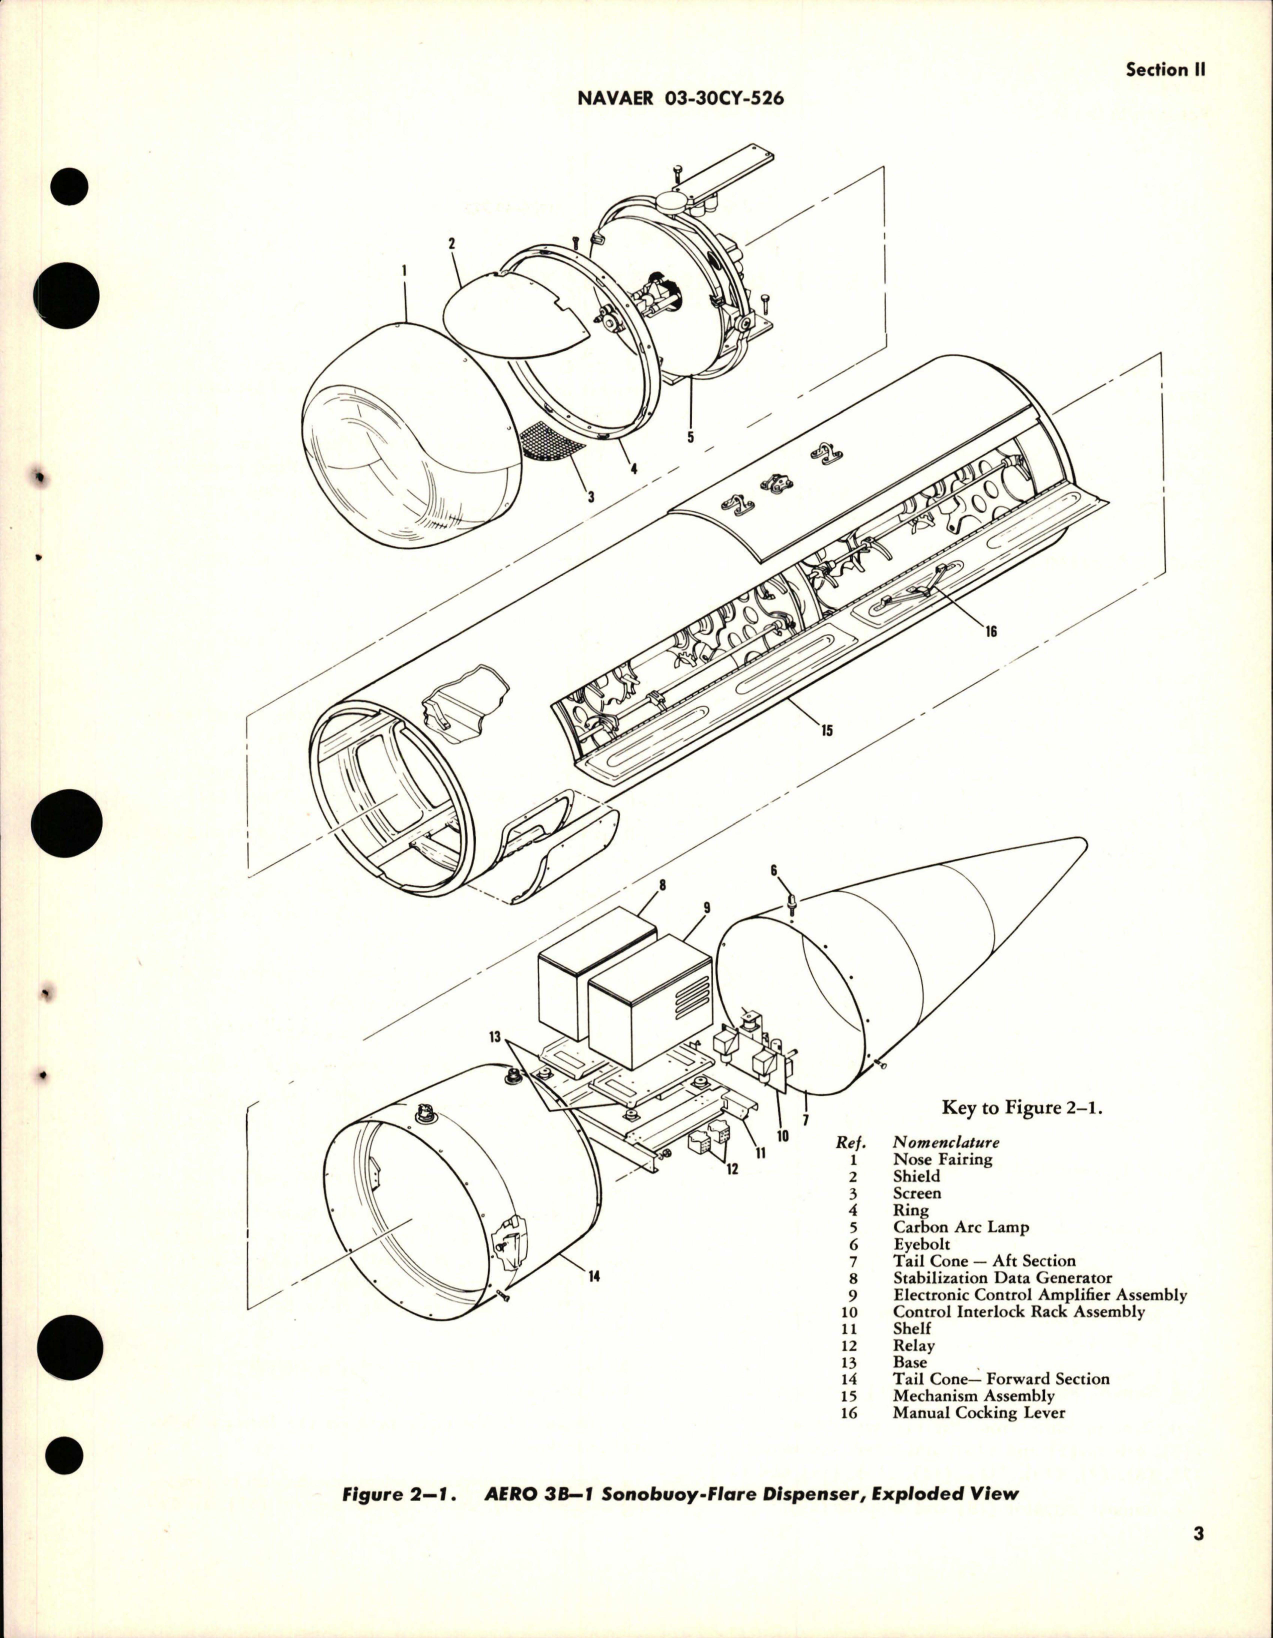 Sample page 7 from AirCorps Library document: Overhaul Instructions for AERO 3B-1 Sonobuoy-Flare Dispenser - Part 5382792-515